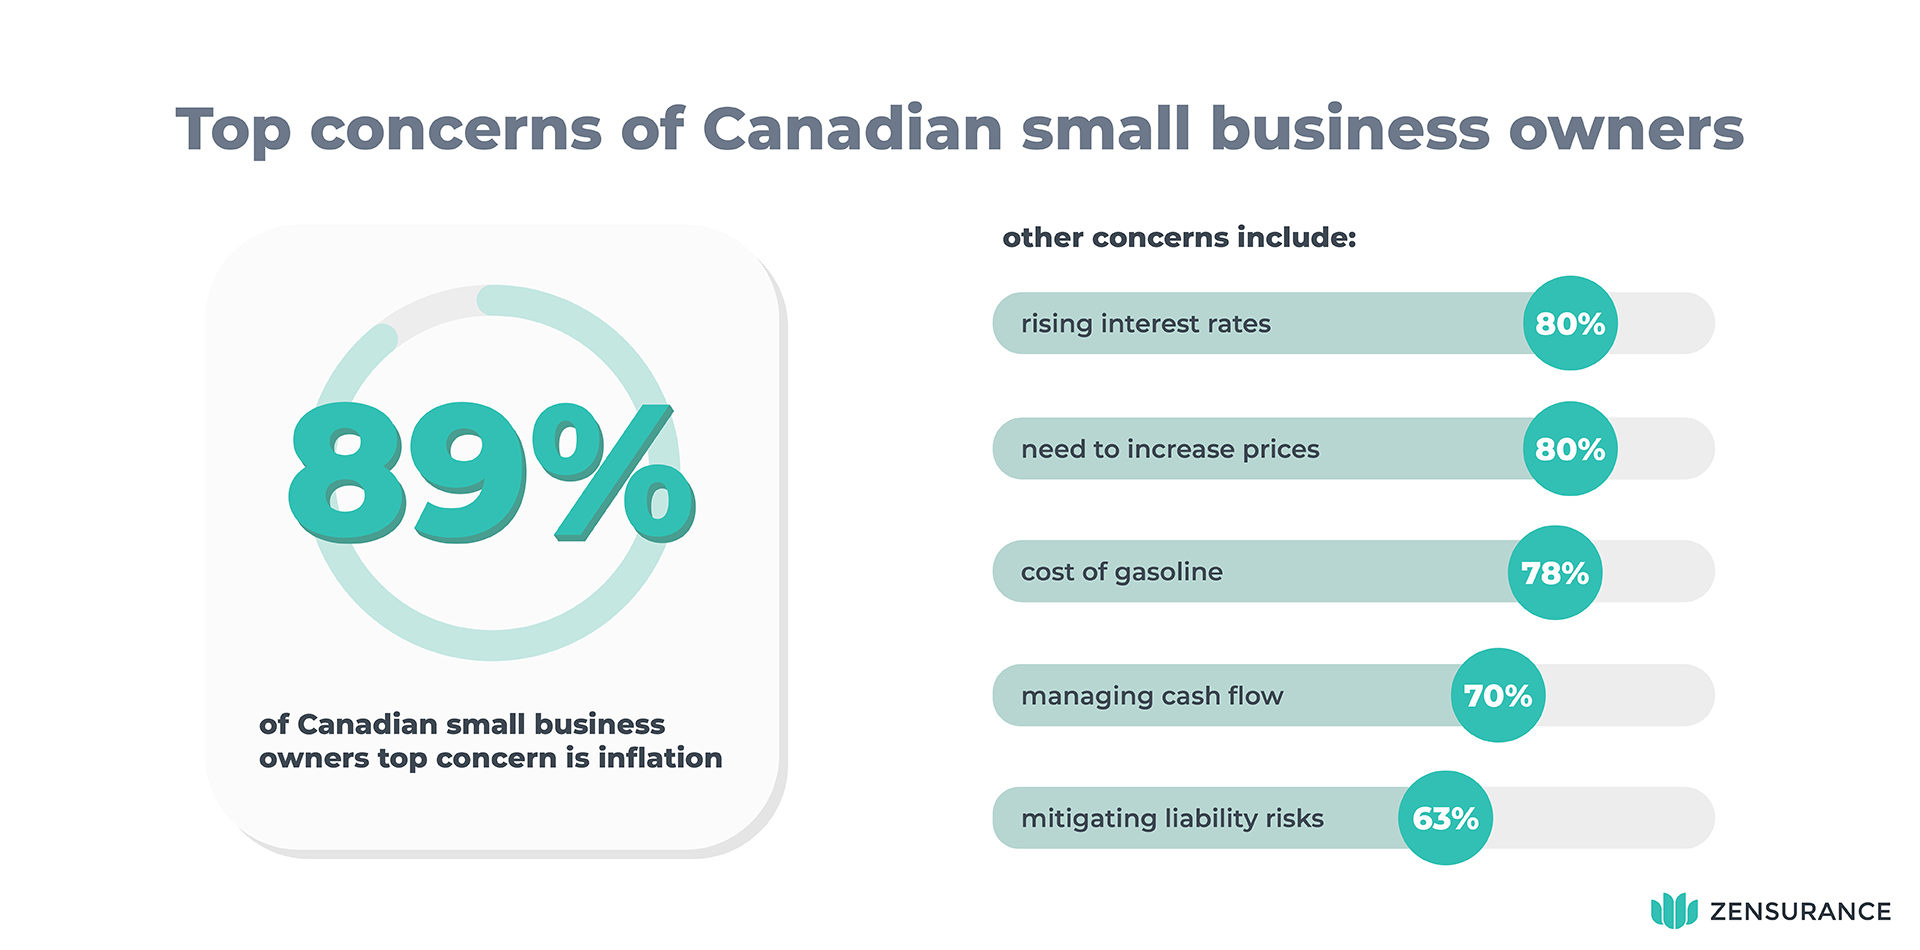 Top concerns of Canadian small business owners.